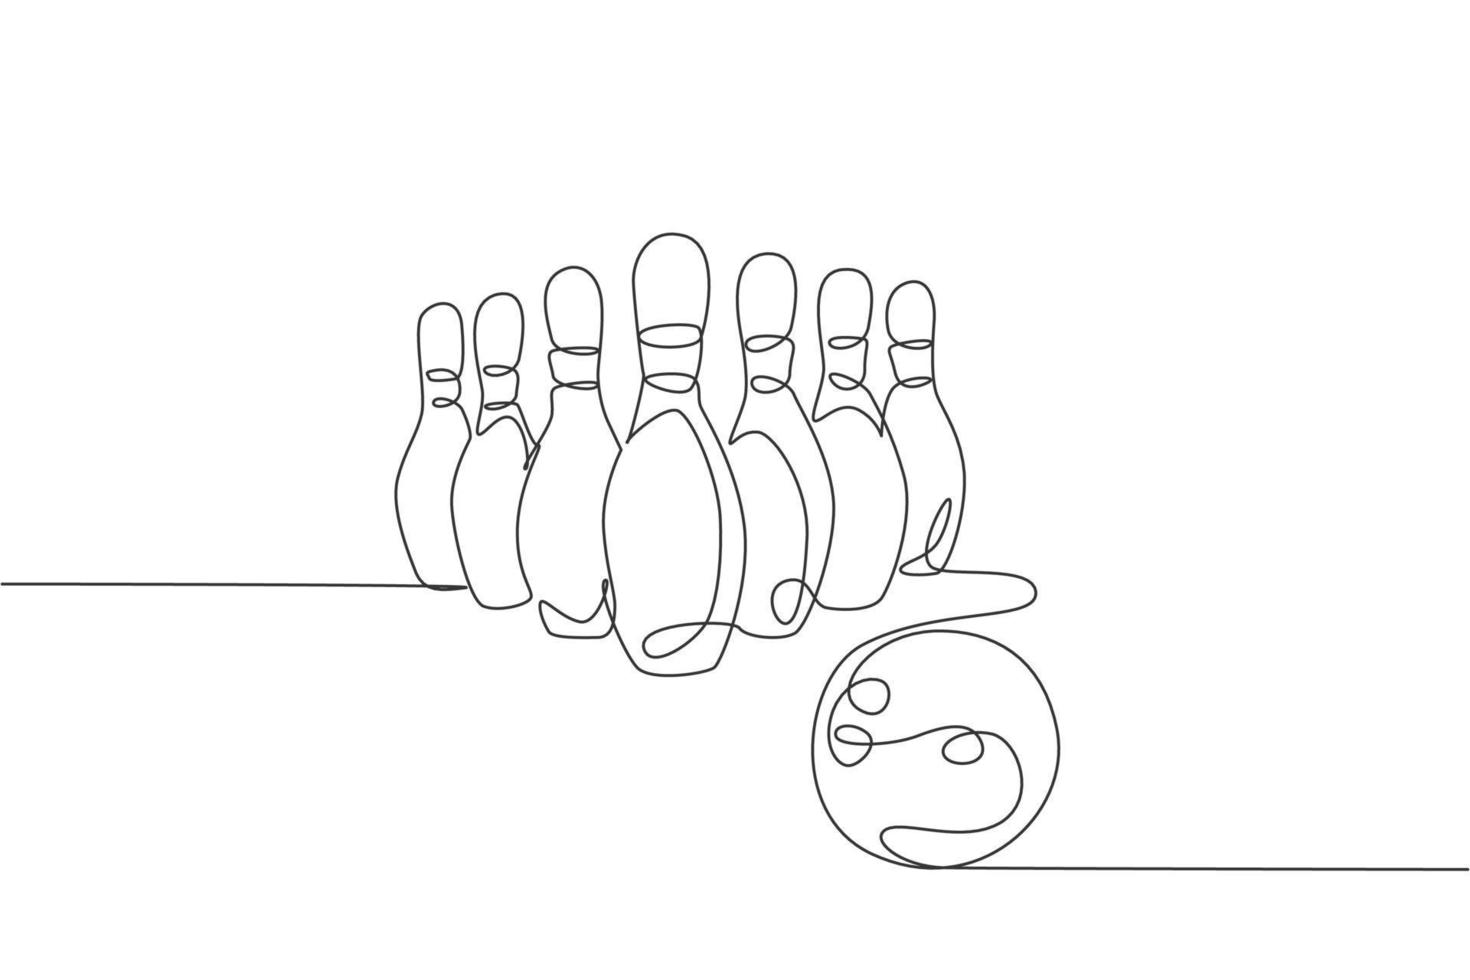 Single continuous line drawing of bowling pins lined up at bowling lane. Doing sport hobby at leisure time concept. Trendy one line draw design graphic vector illustration